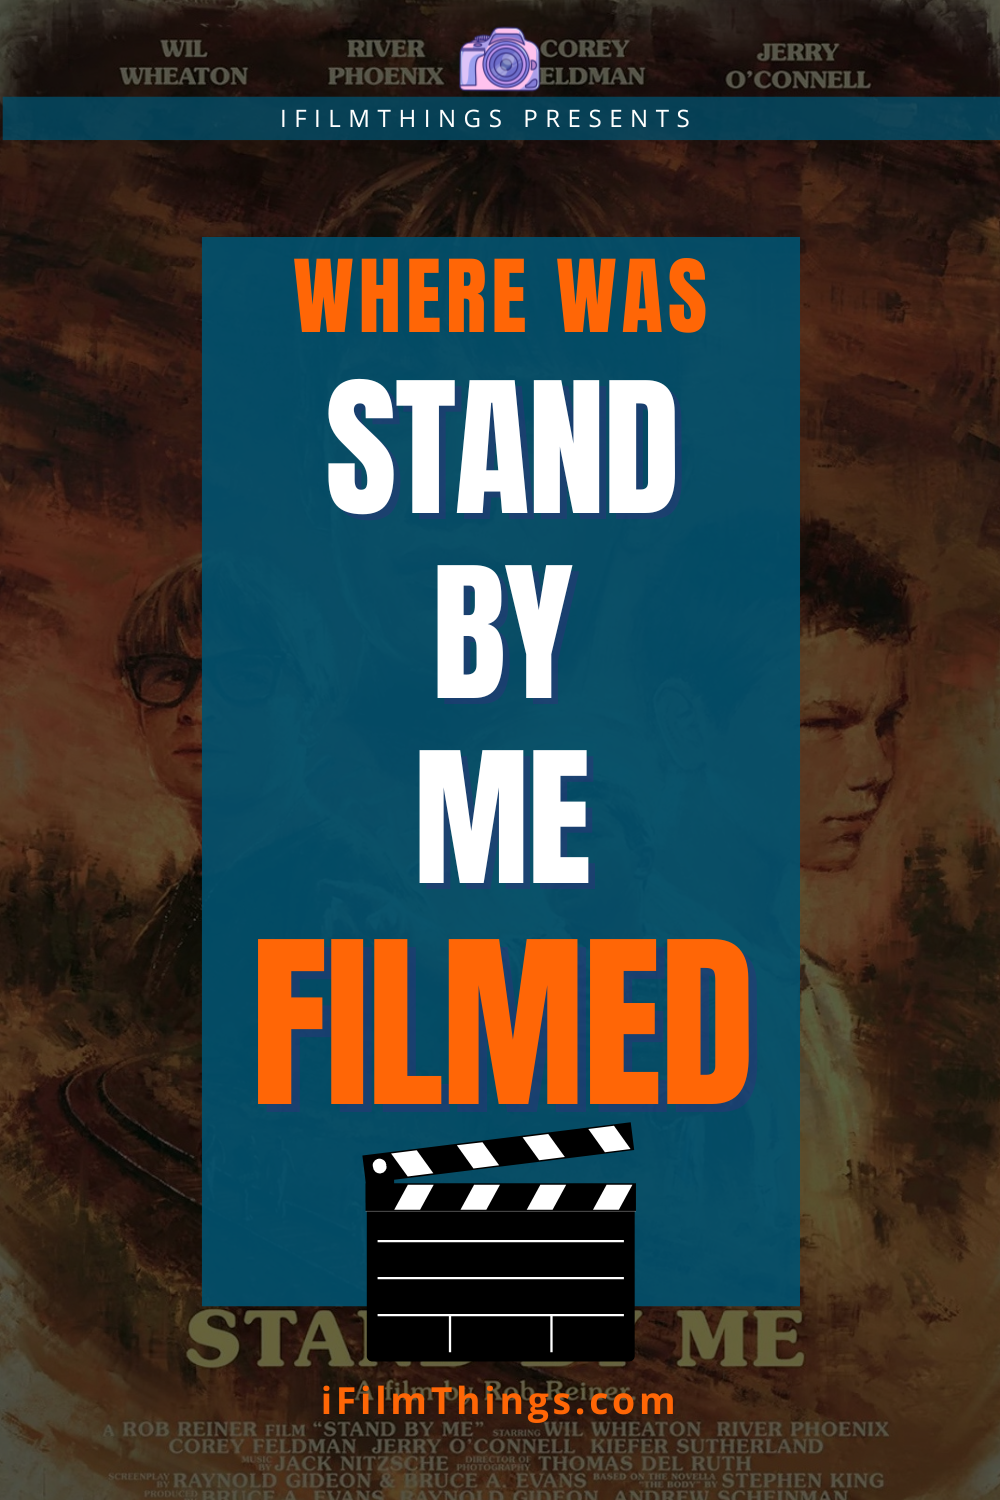 Pinterest - Where Was Stand By Me Filmed